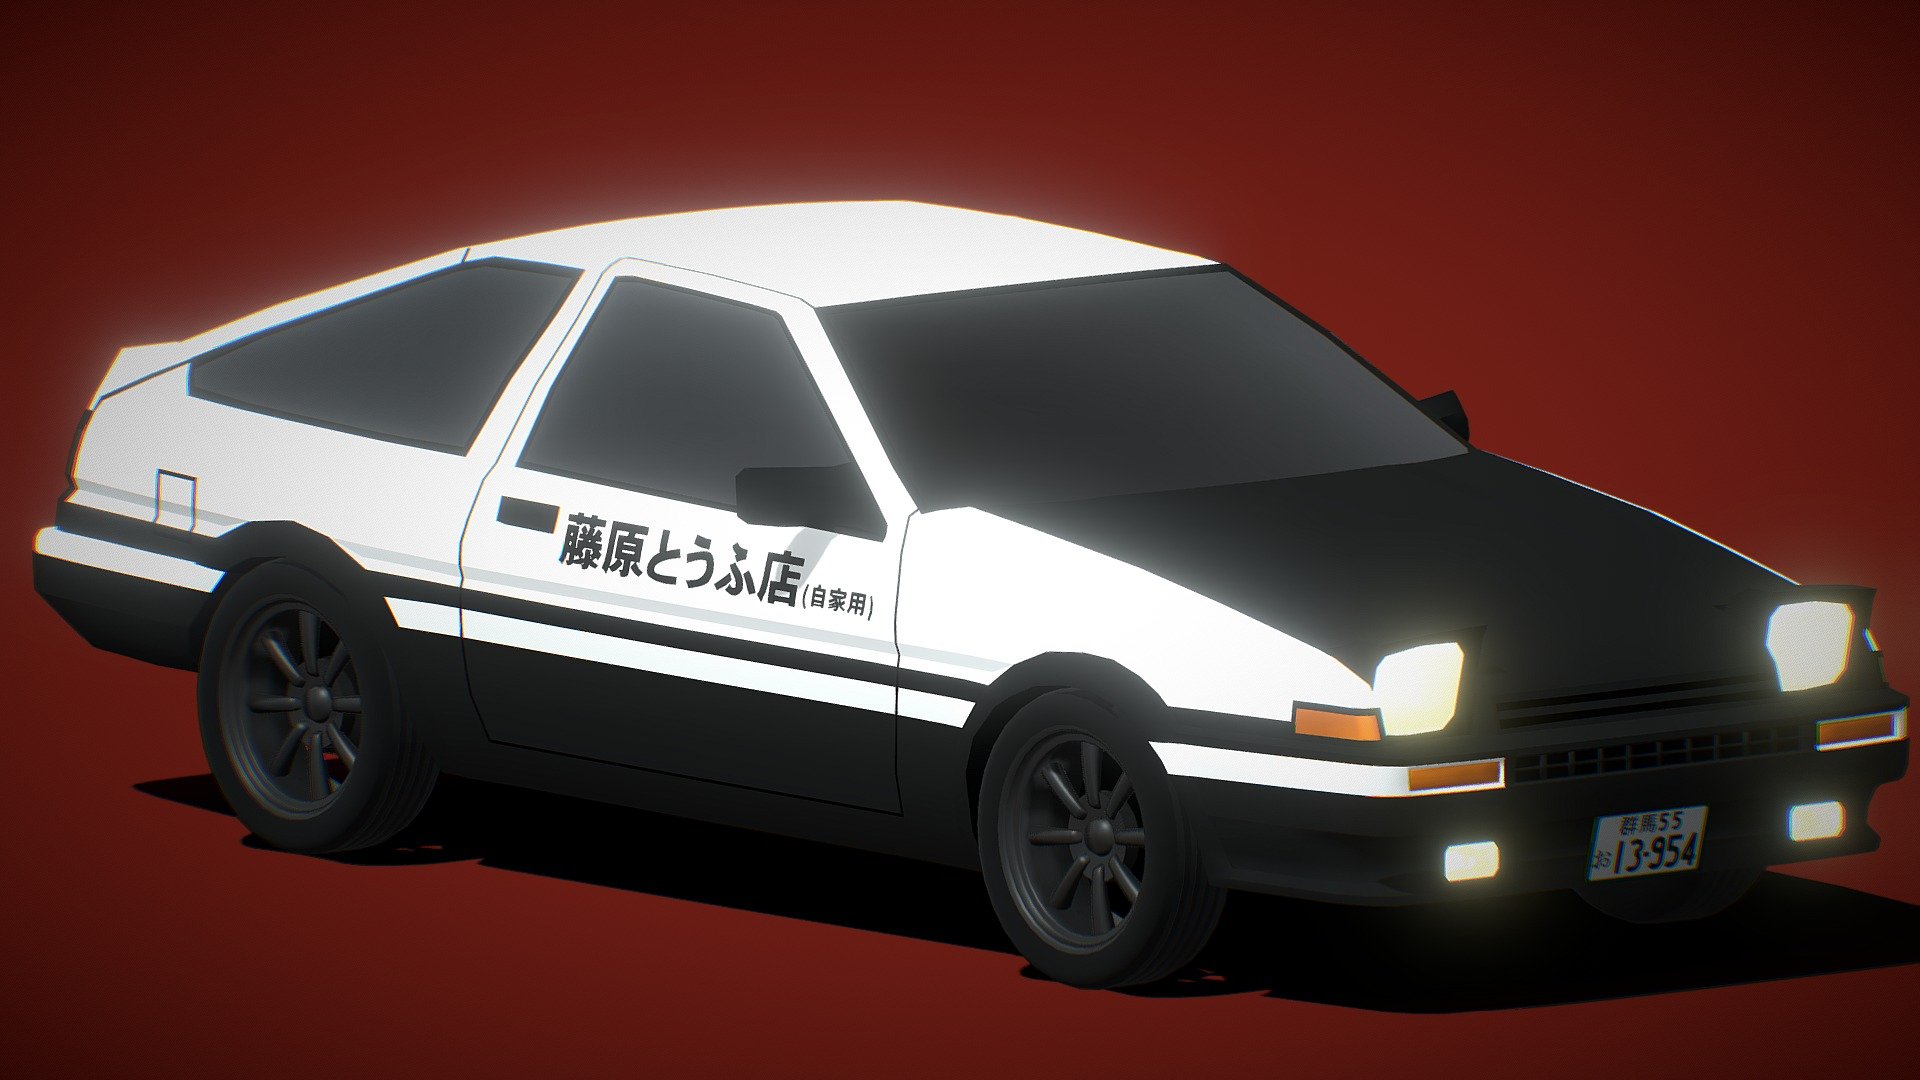 Pin by Ku on クルマ | Classic japanese cars, Nissan gtr skyline, Initial d car